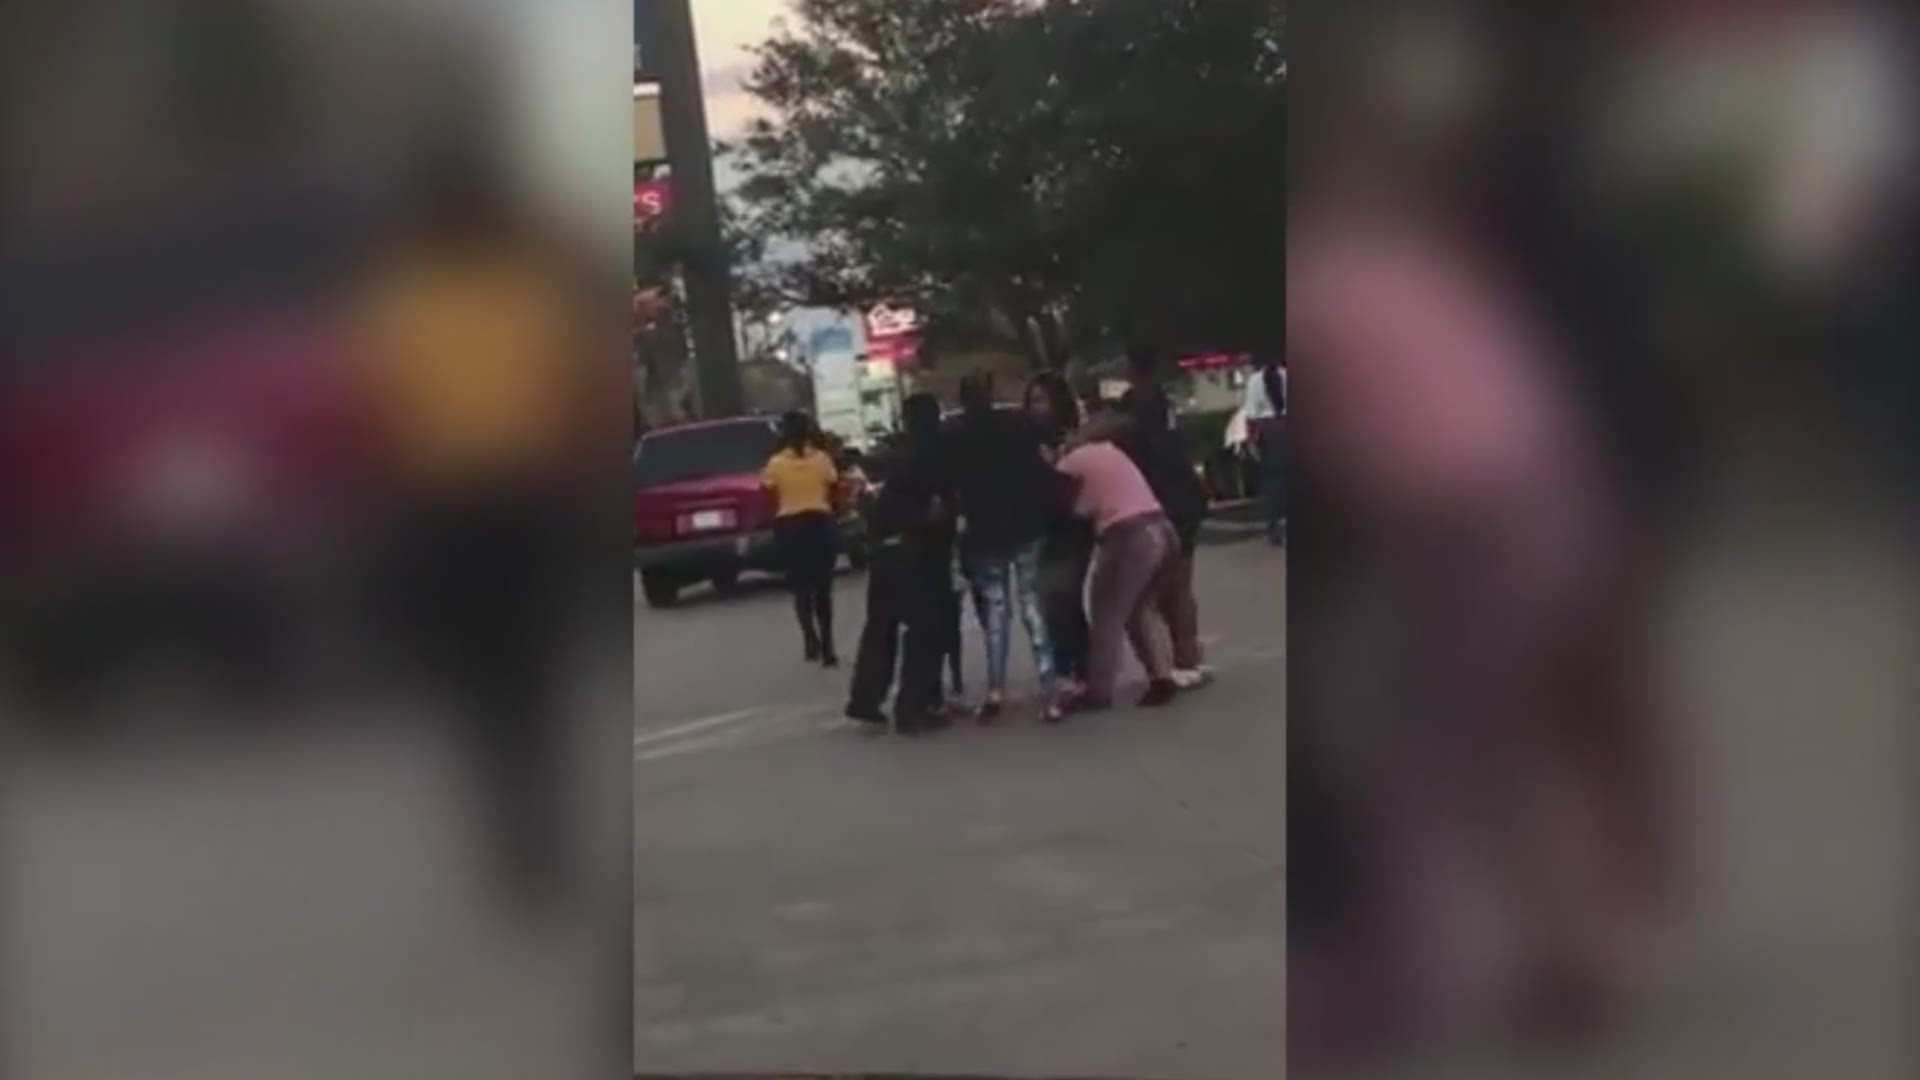 RAW VIDEO: Adults caught on video brawling in Beaumont Chuck E. Cheese's parking lot